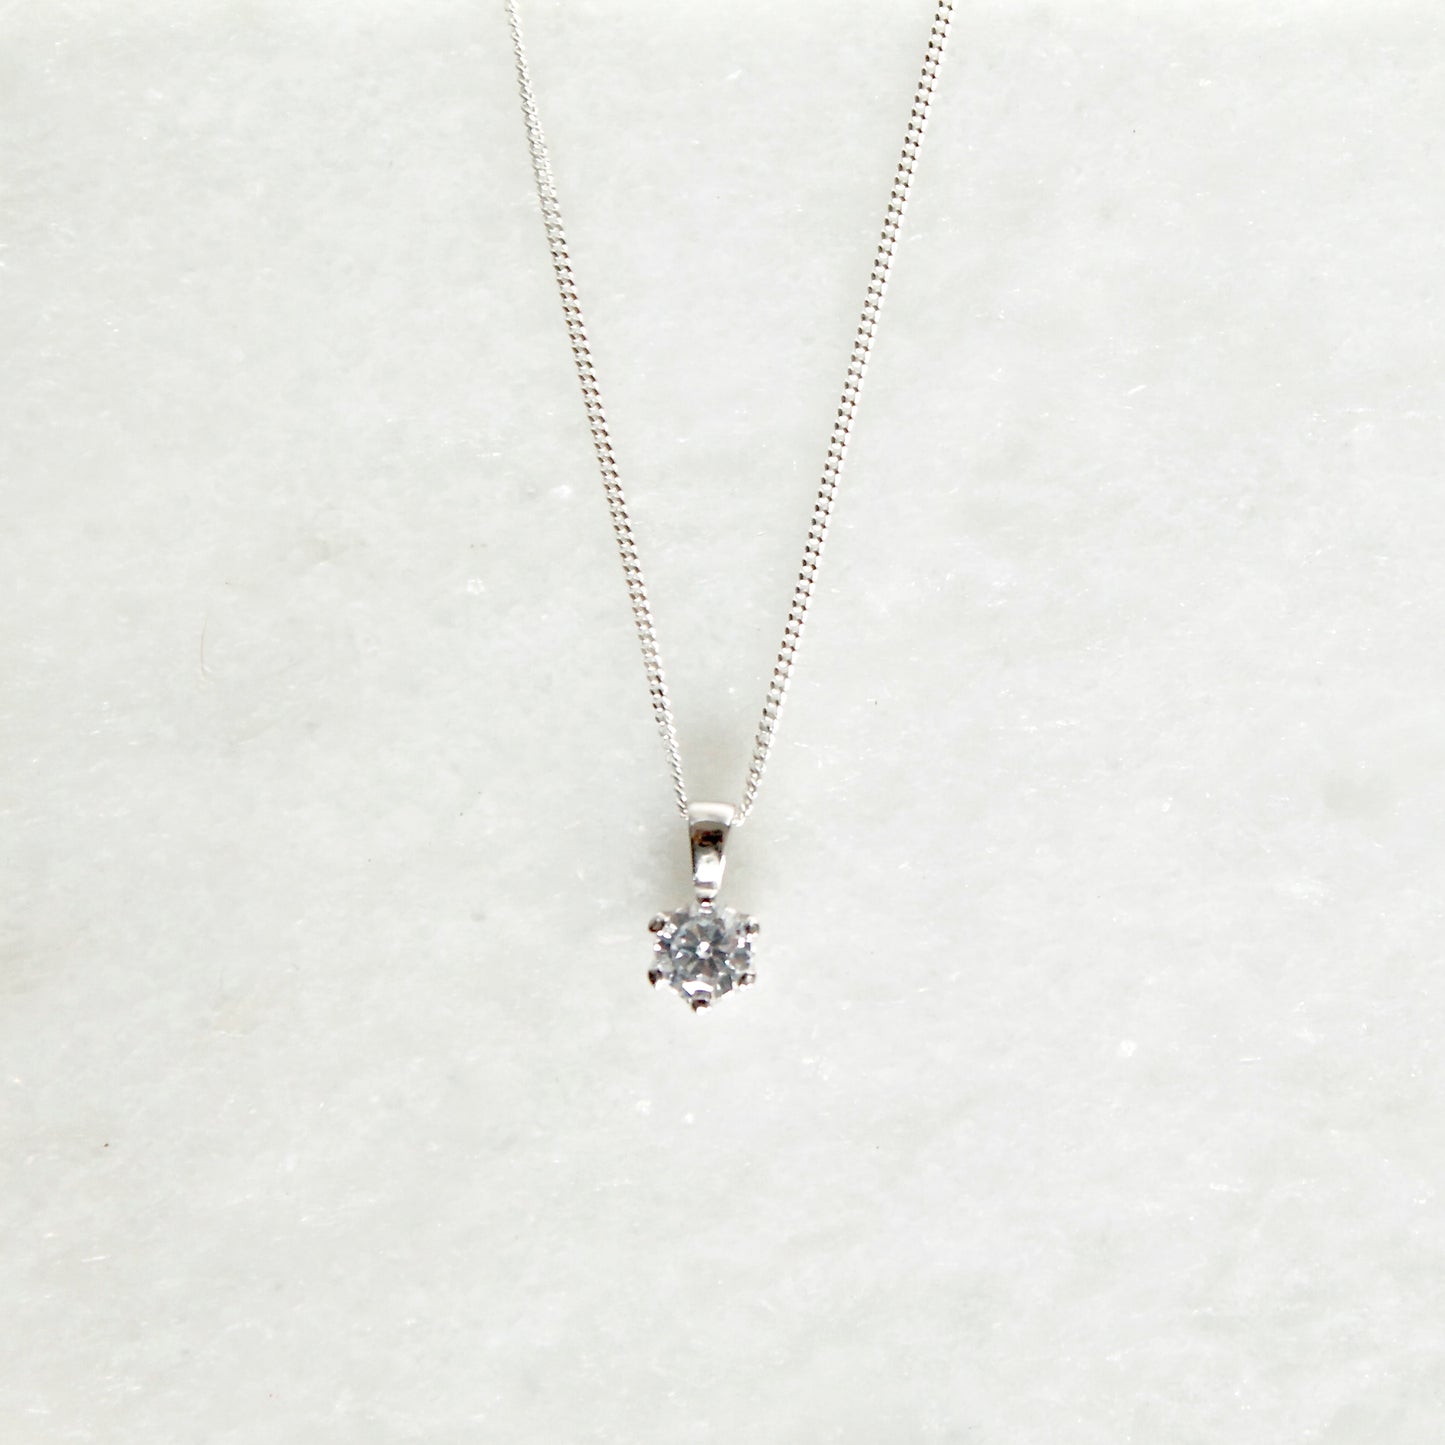 Stardust Spark Necklace - Silver